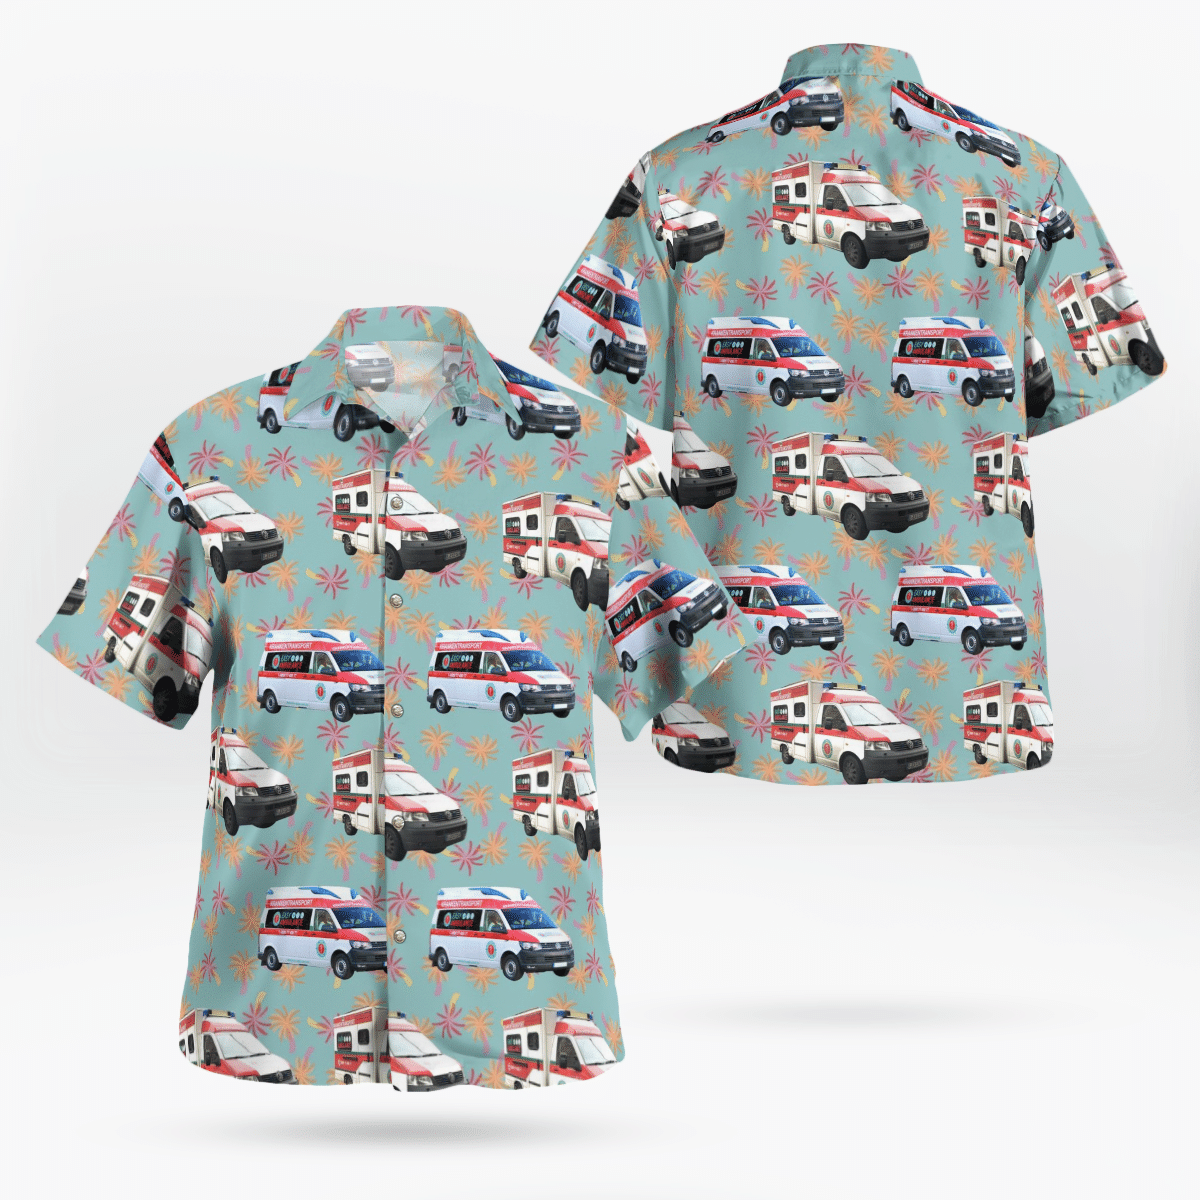 Shop now to find the perfect Hawaii Shirt for your hobby 81